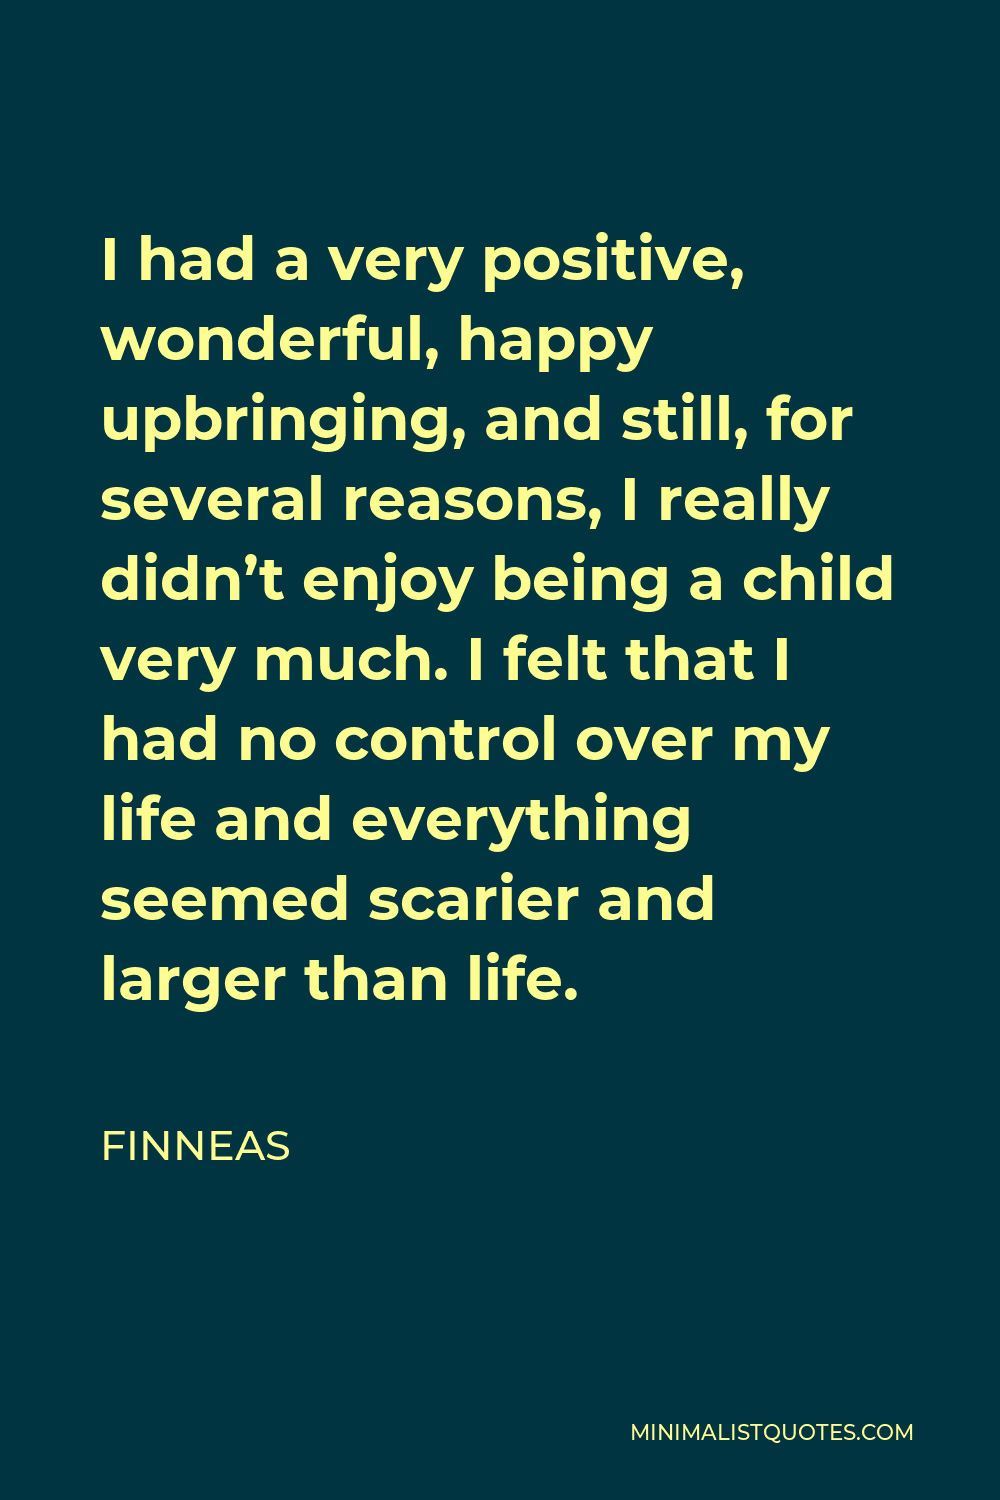 Finneas Quote - I had a very positive, wonderful, happy upbringing, and still, for several reasons, I really didn’t enjoy being a child very much. I felt that I had no control over my life and everything seemed scarier and larger than life.